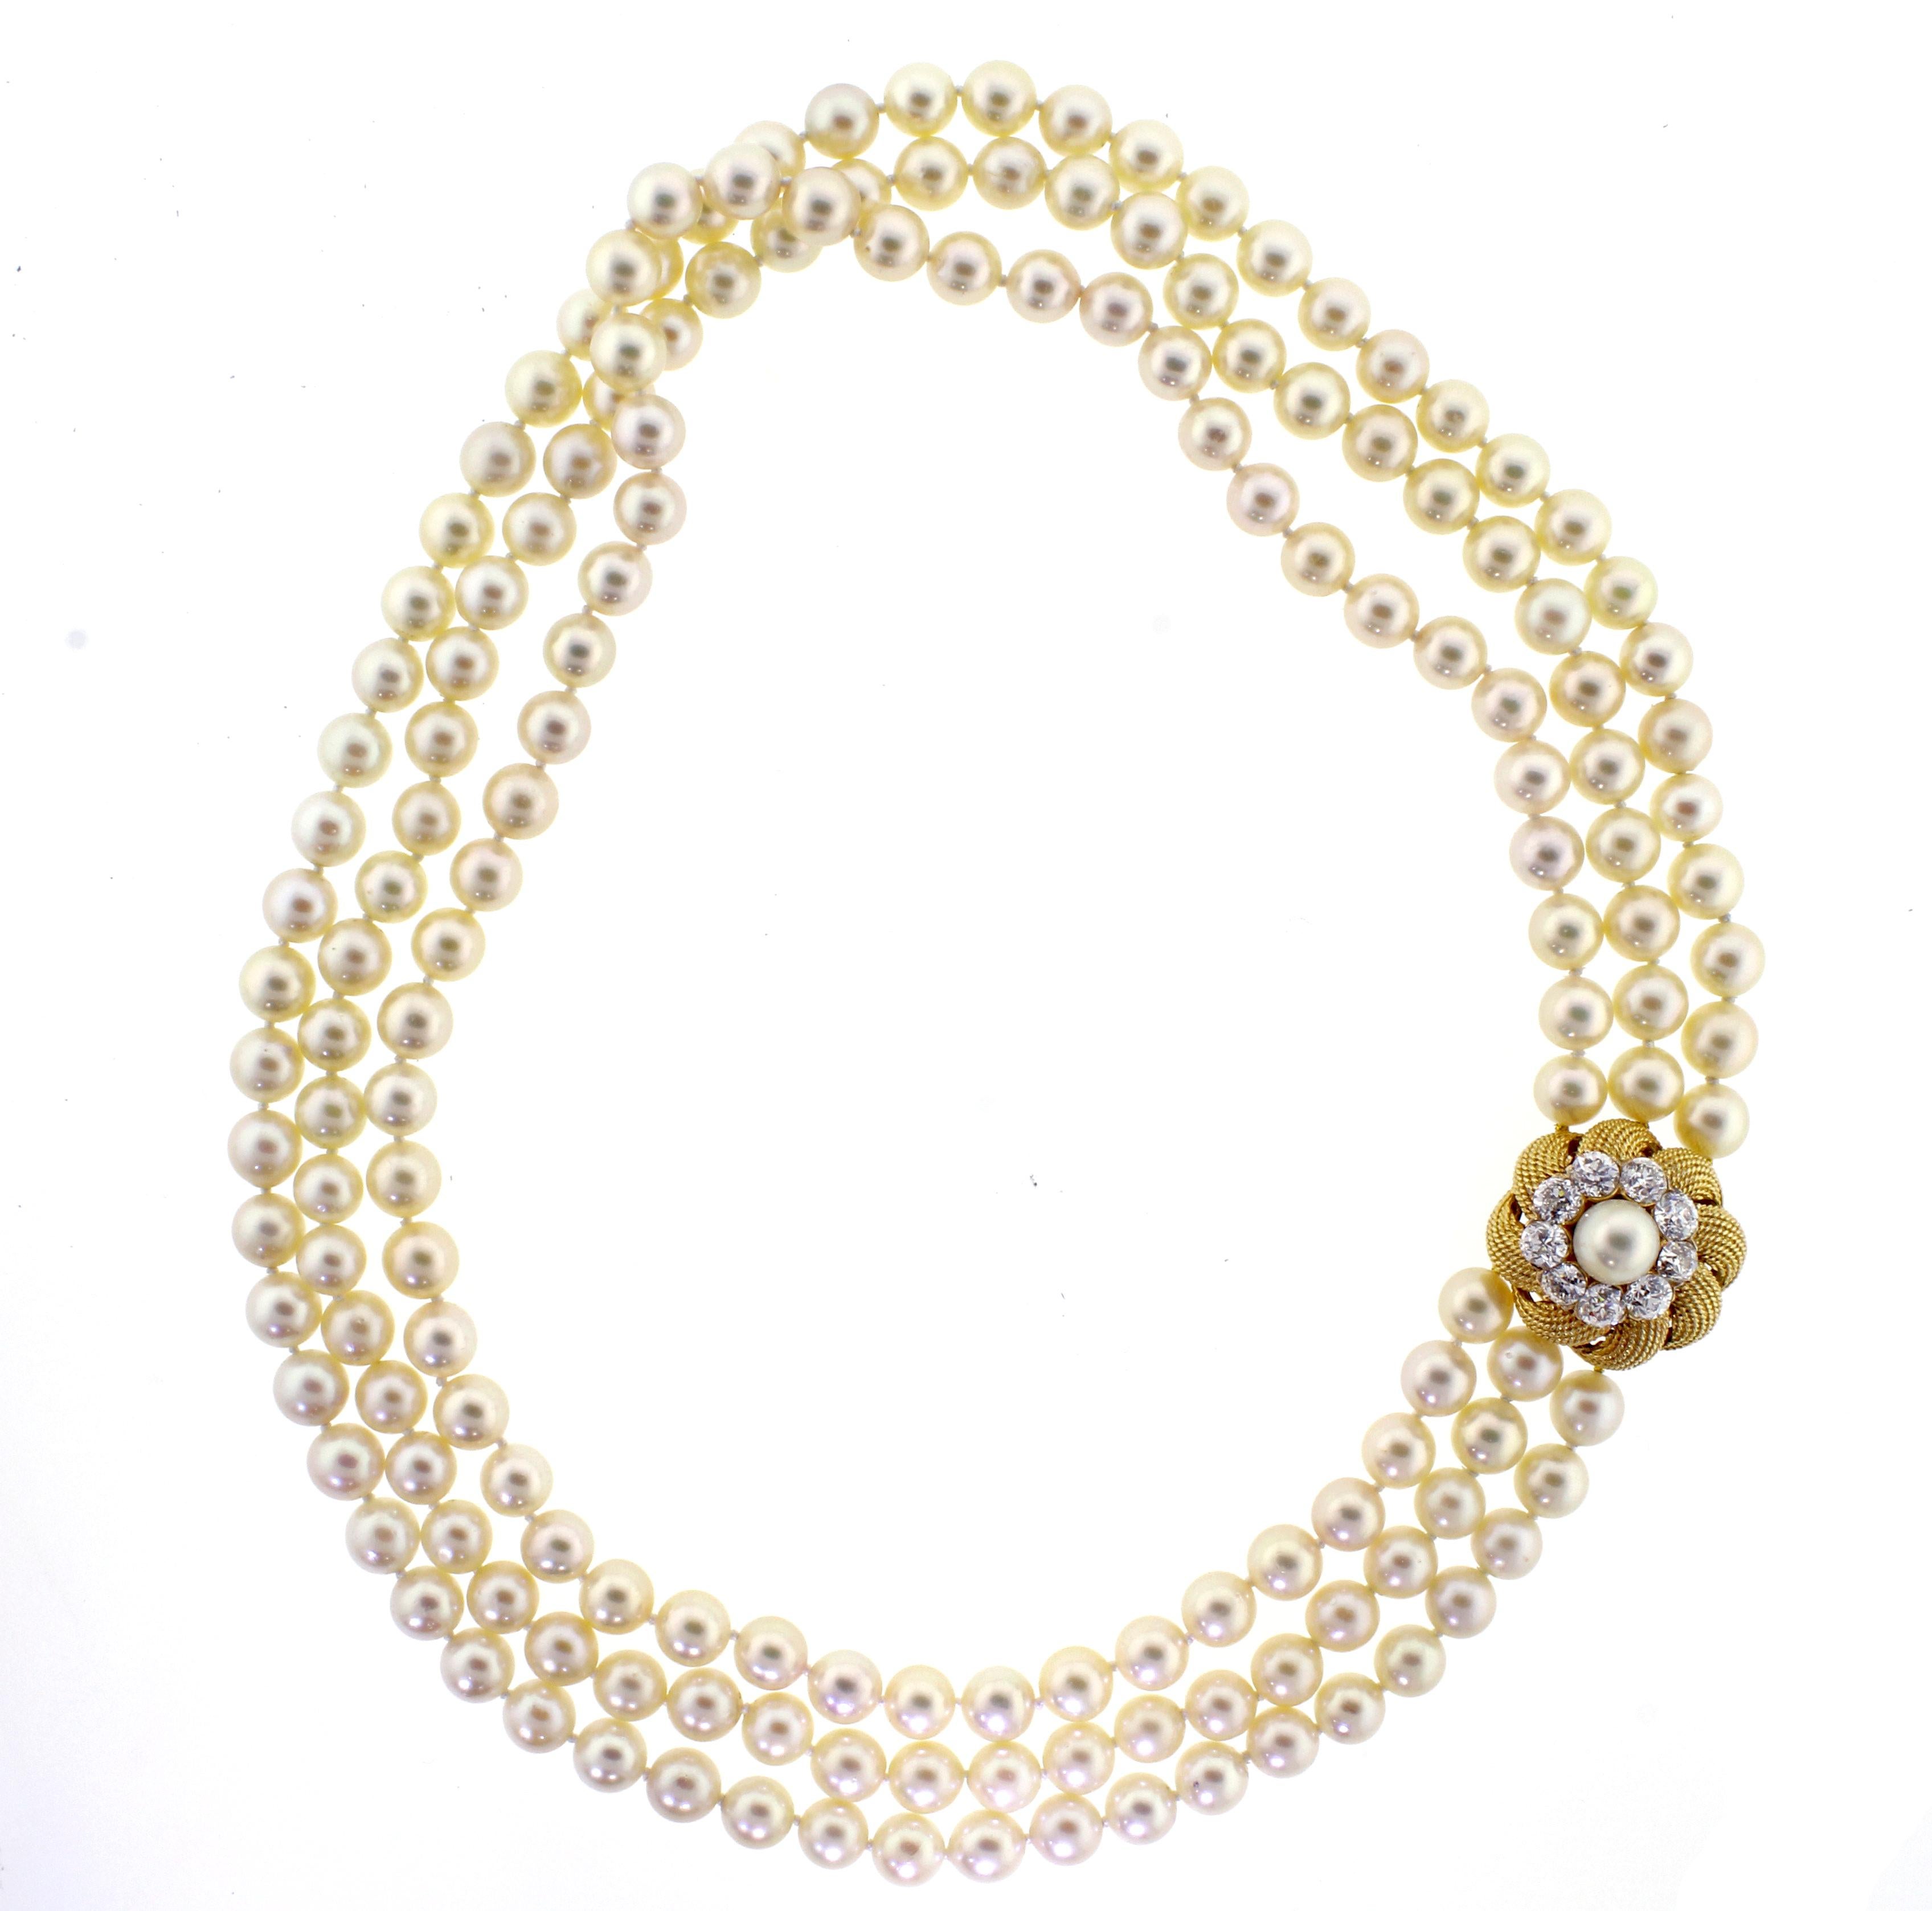 From David Webb, a pearl and diamond necklace comprised of three strands of 8-8.5mm cultured pearls and a stunning diamond clasp.  The clasp boast 9 old European cut diamonds weighing approximately 4 carats. The diamonds are F -G color and VS